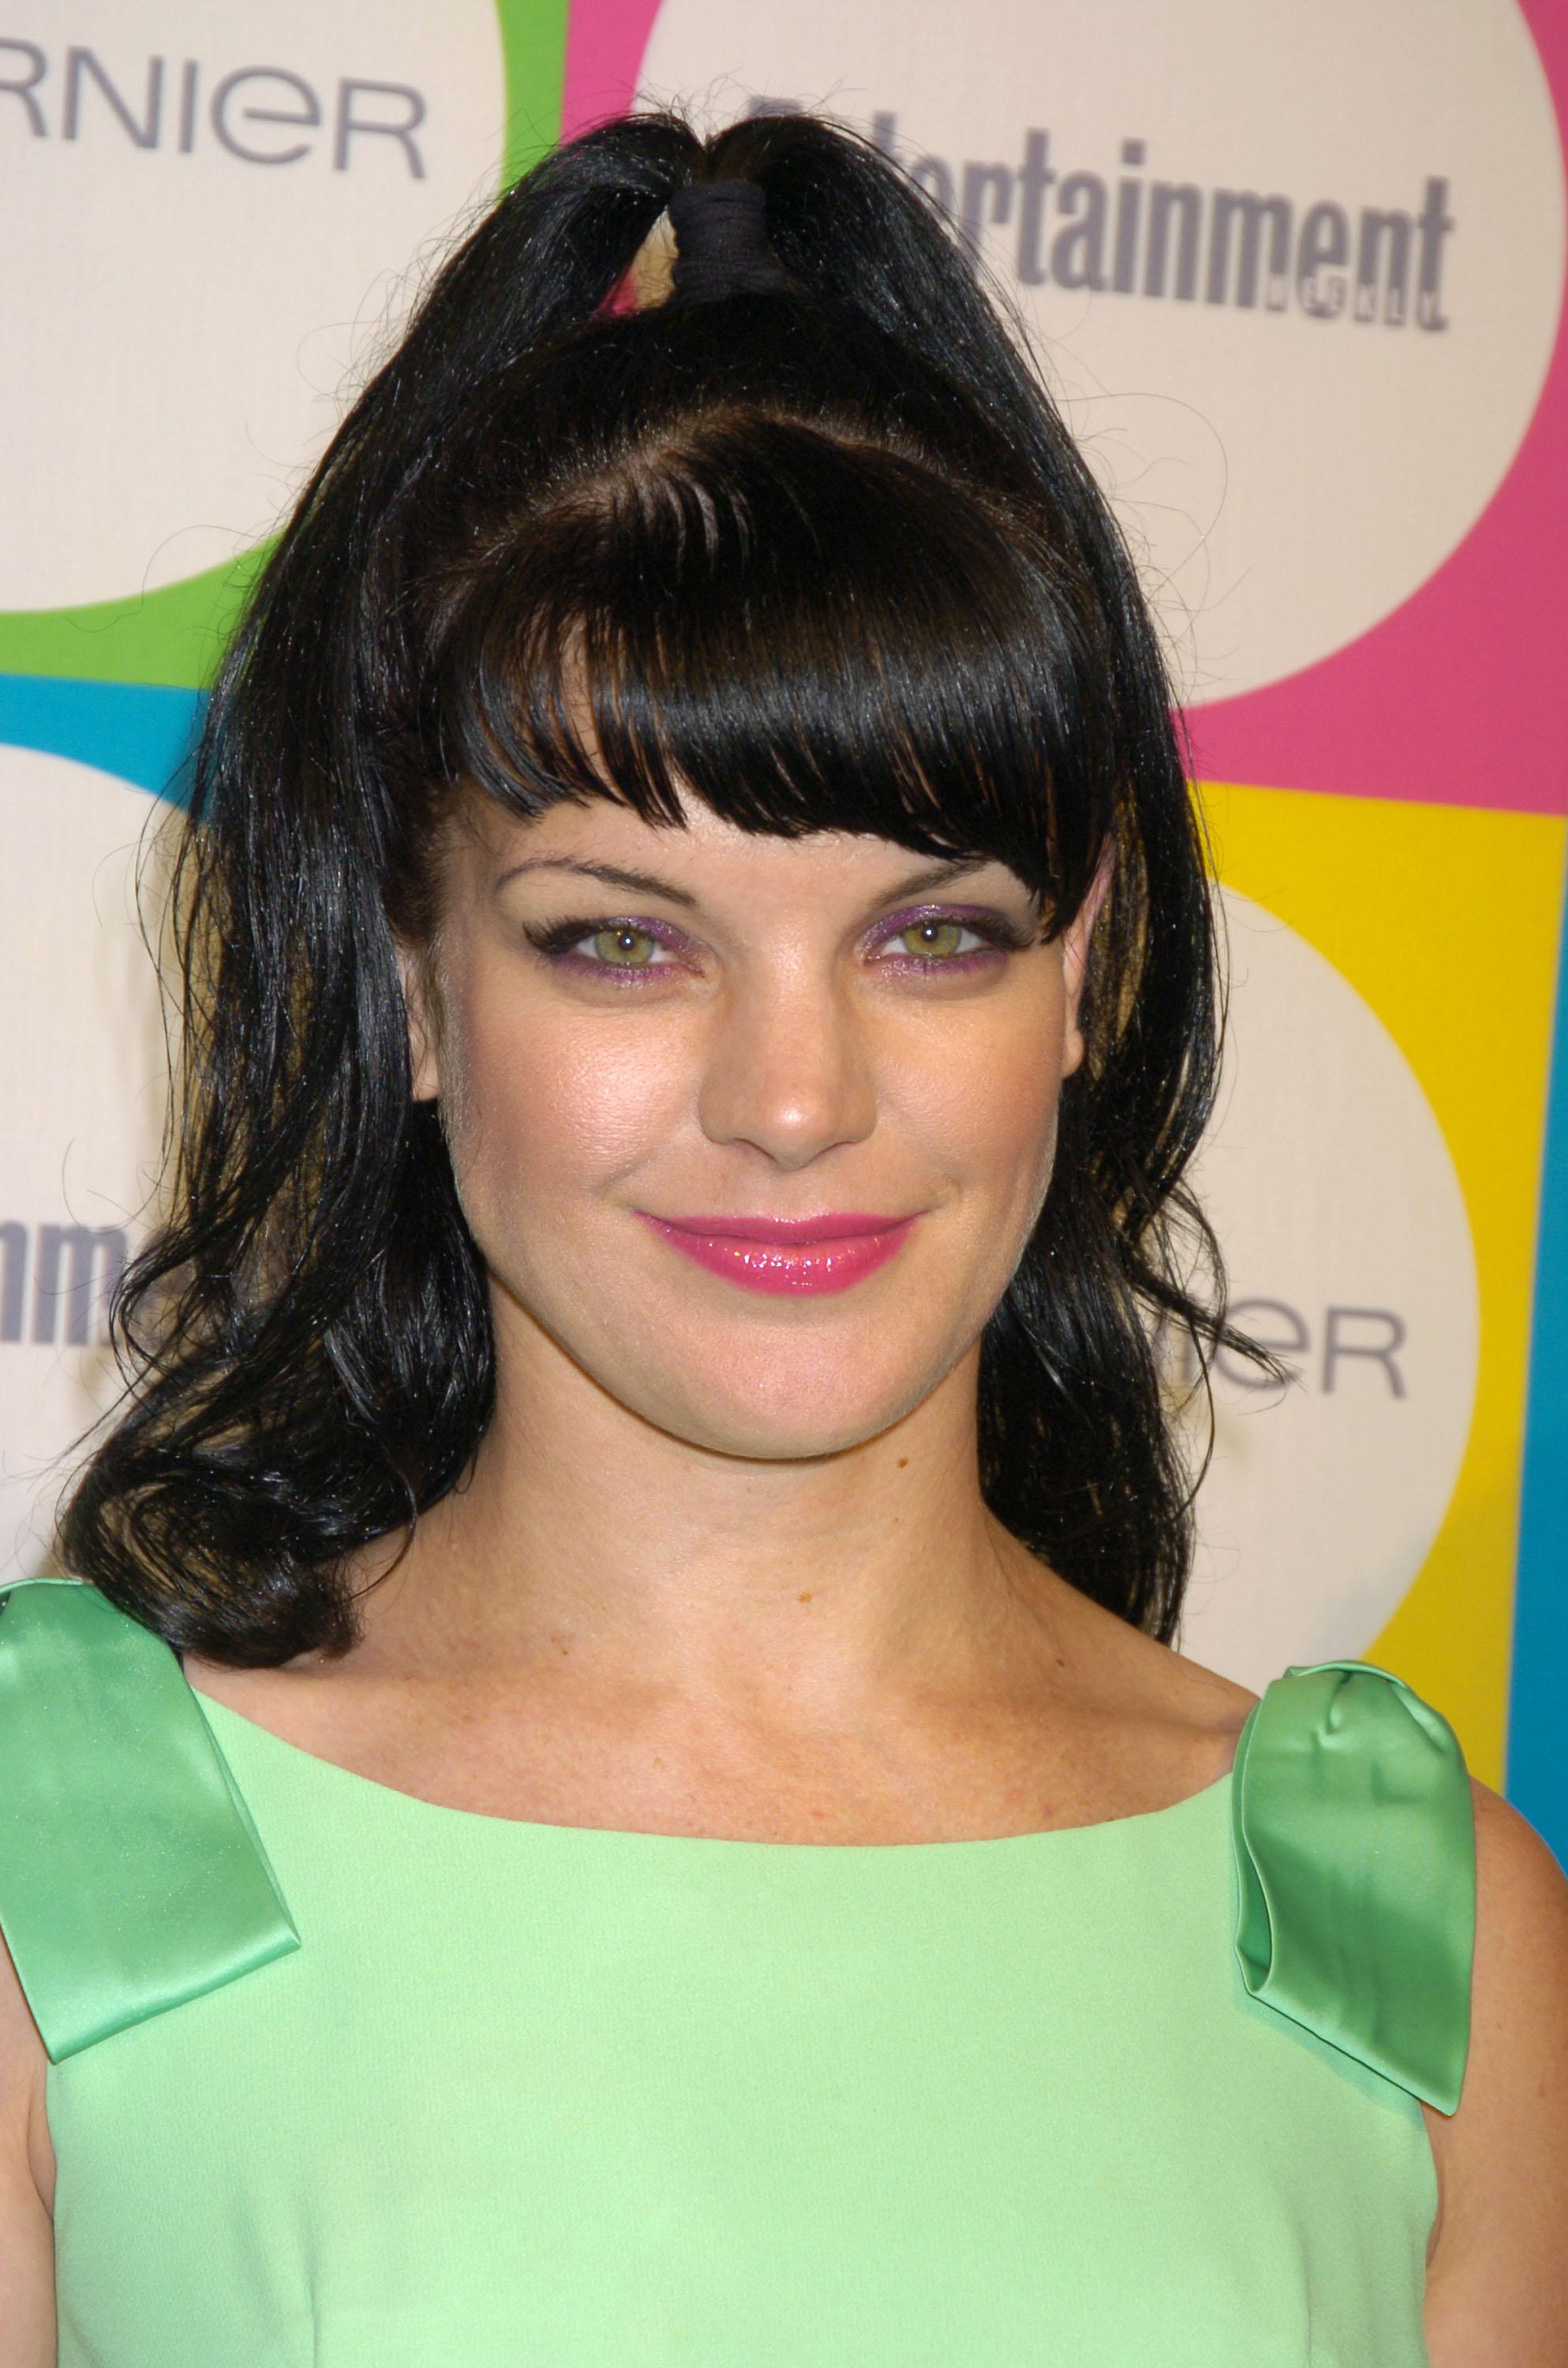 Pauley Perrette during The Entertainment Weekly "Must List" Party in New York City, New York, on June 16, 2005 | Source: Getty Images